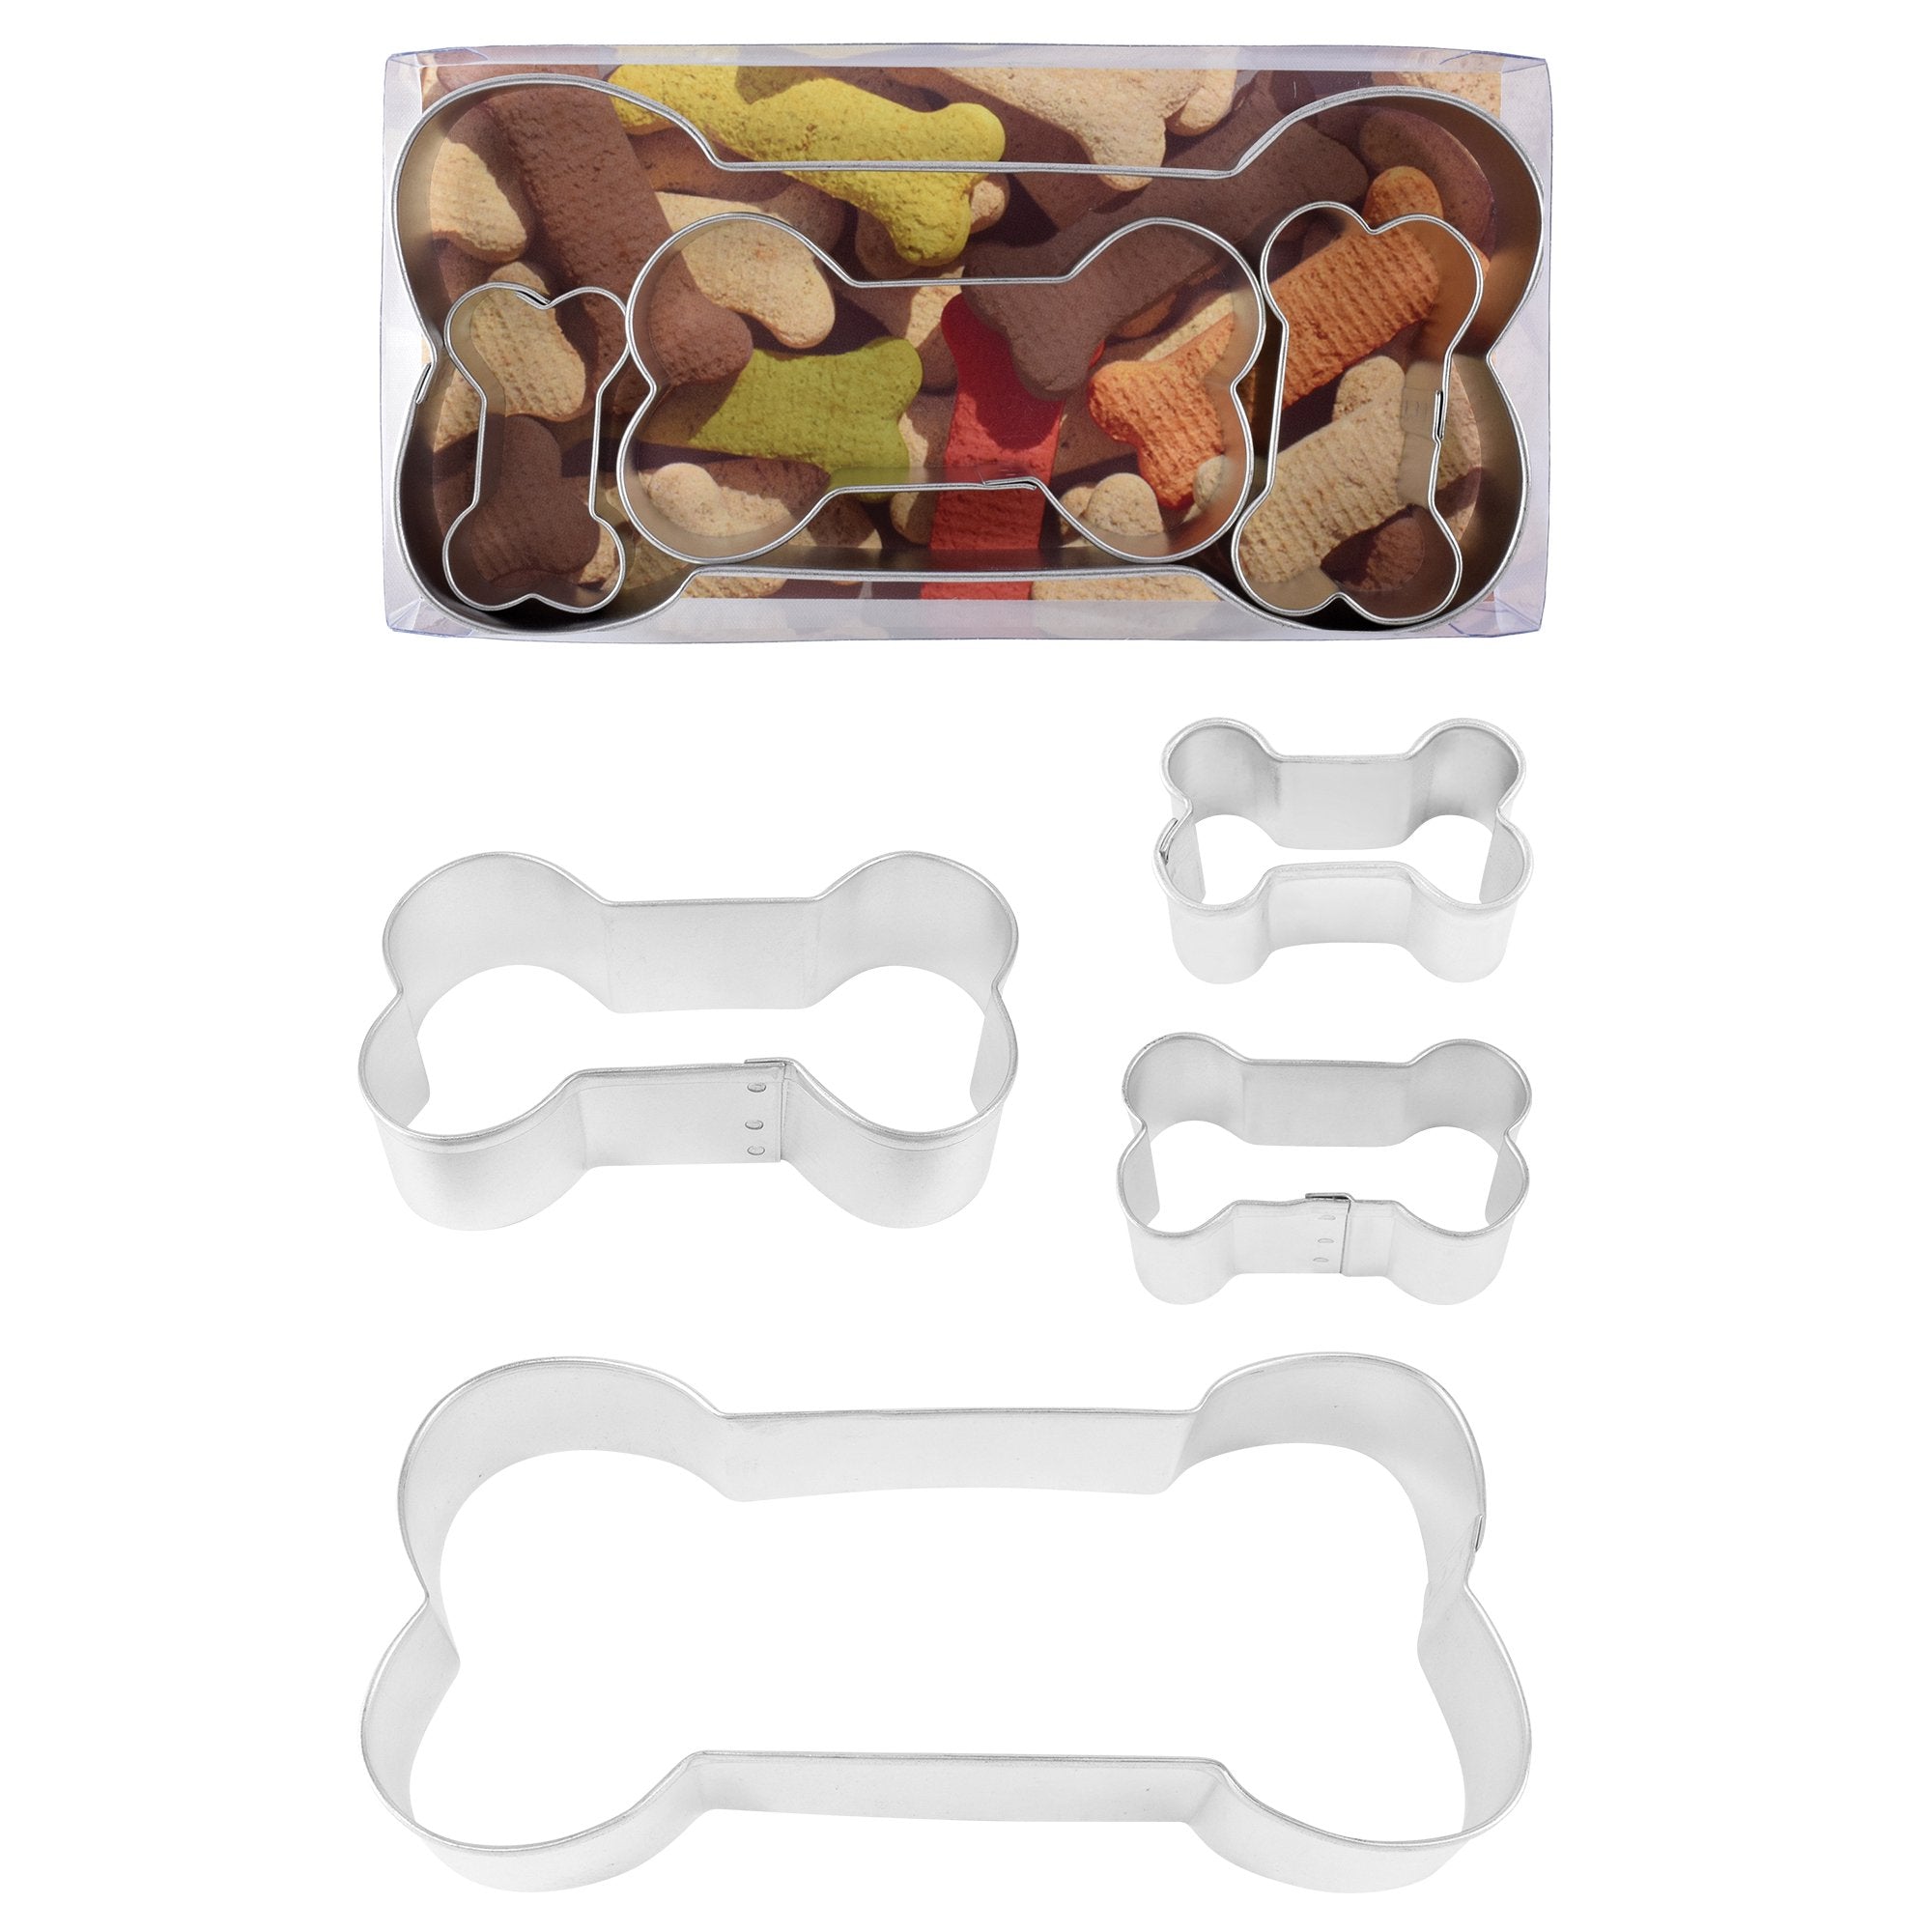 BONE SHAPED Cookie Cutter Set~Perfect for Homemade Dog Treats! Or people treats!